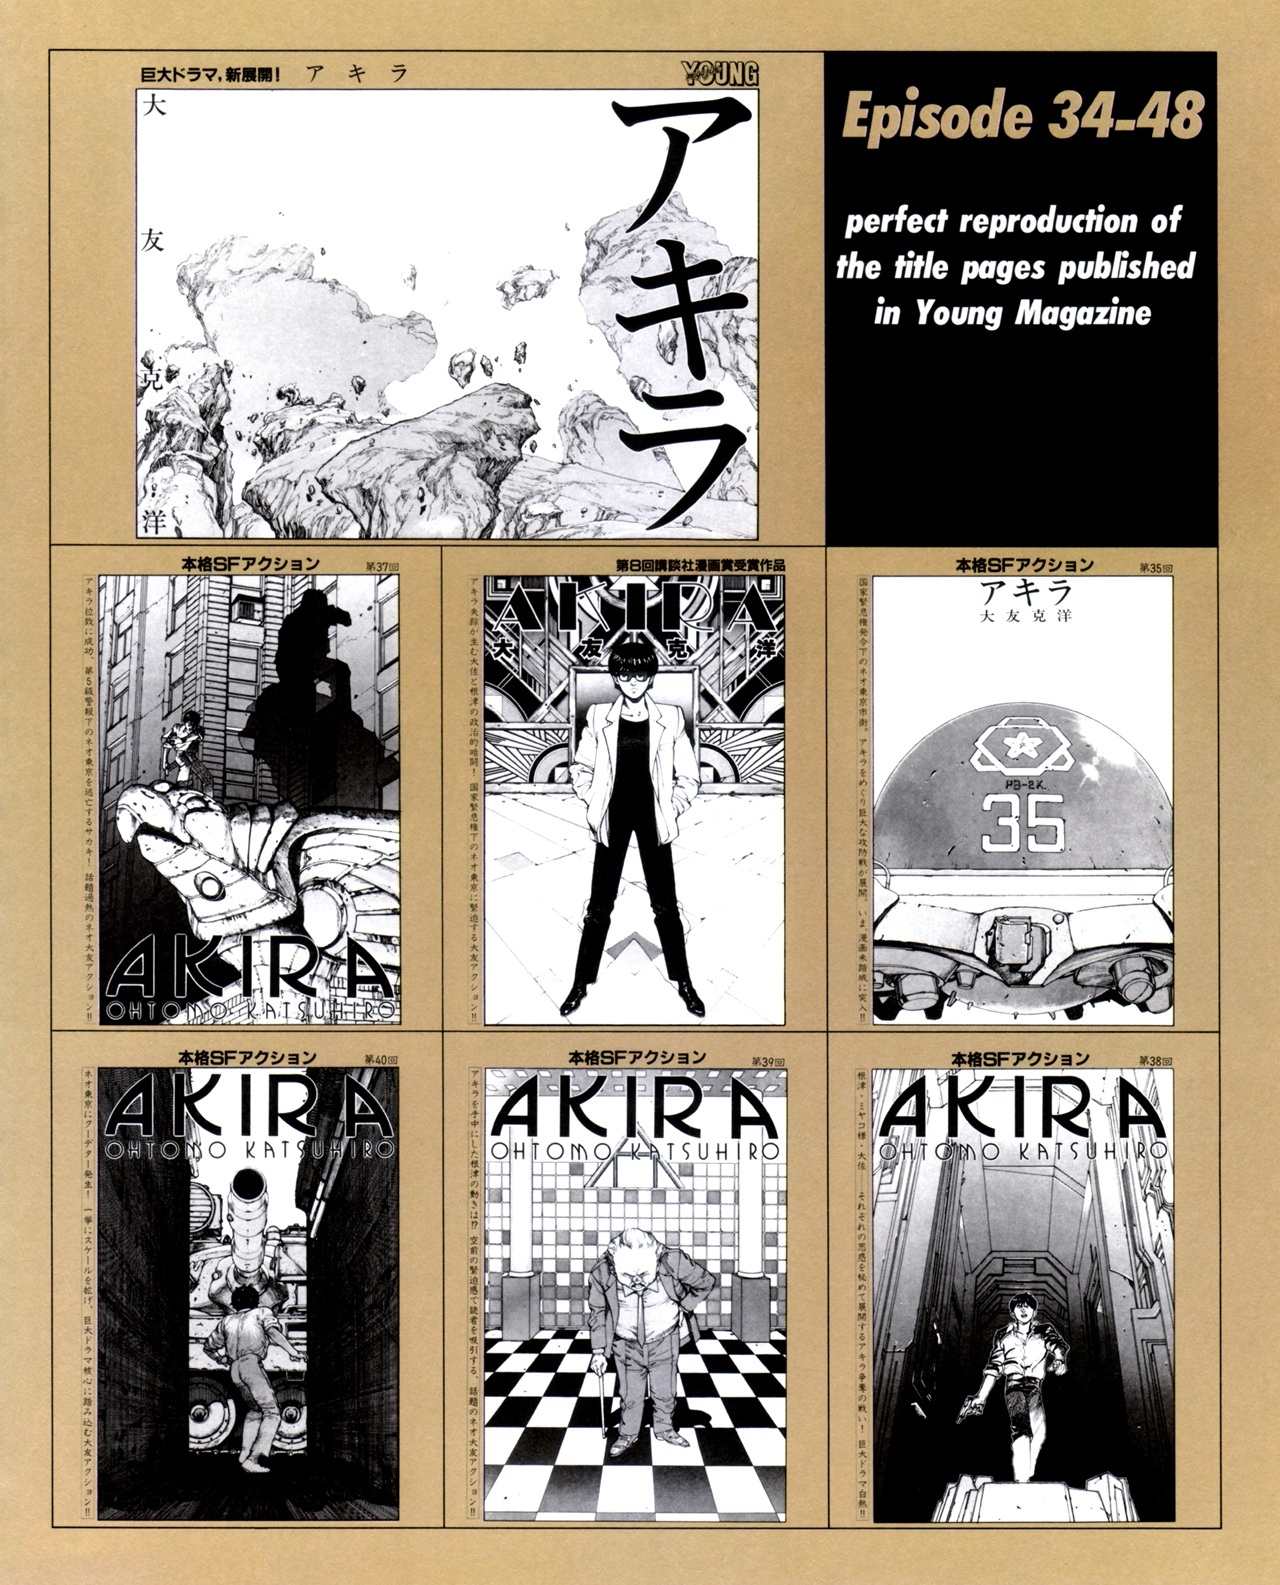 Akira club - The memory of Akira lives on in our hearts! 102